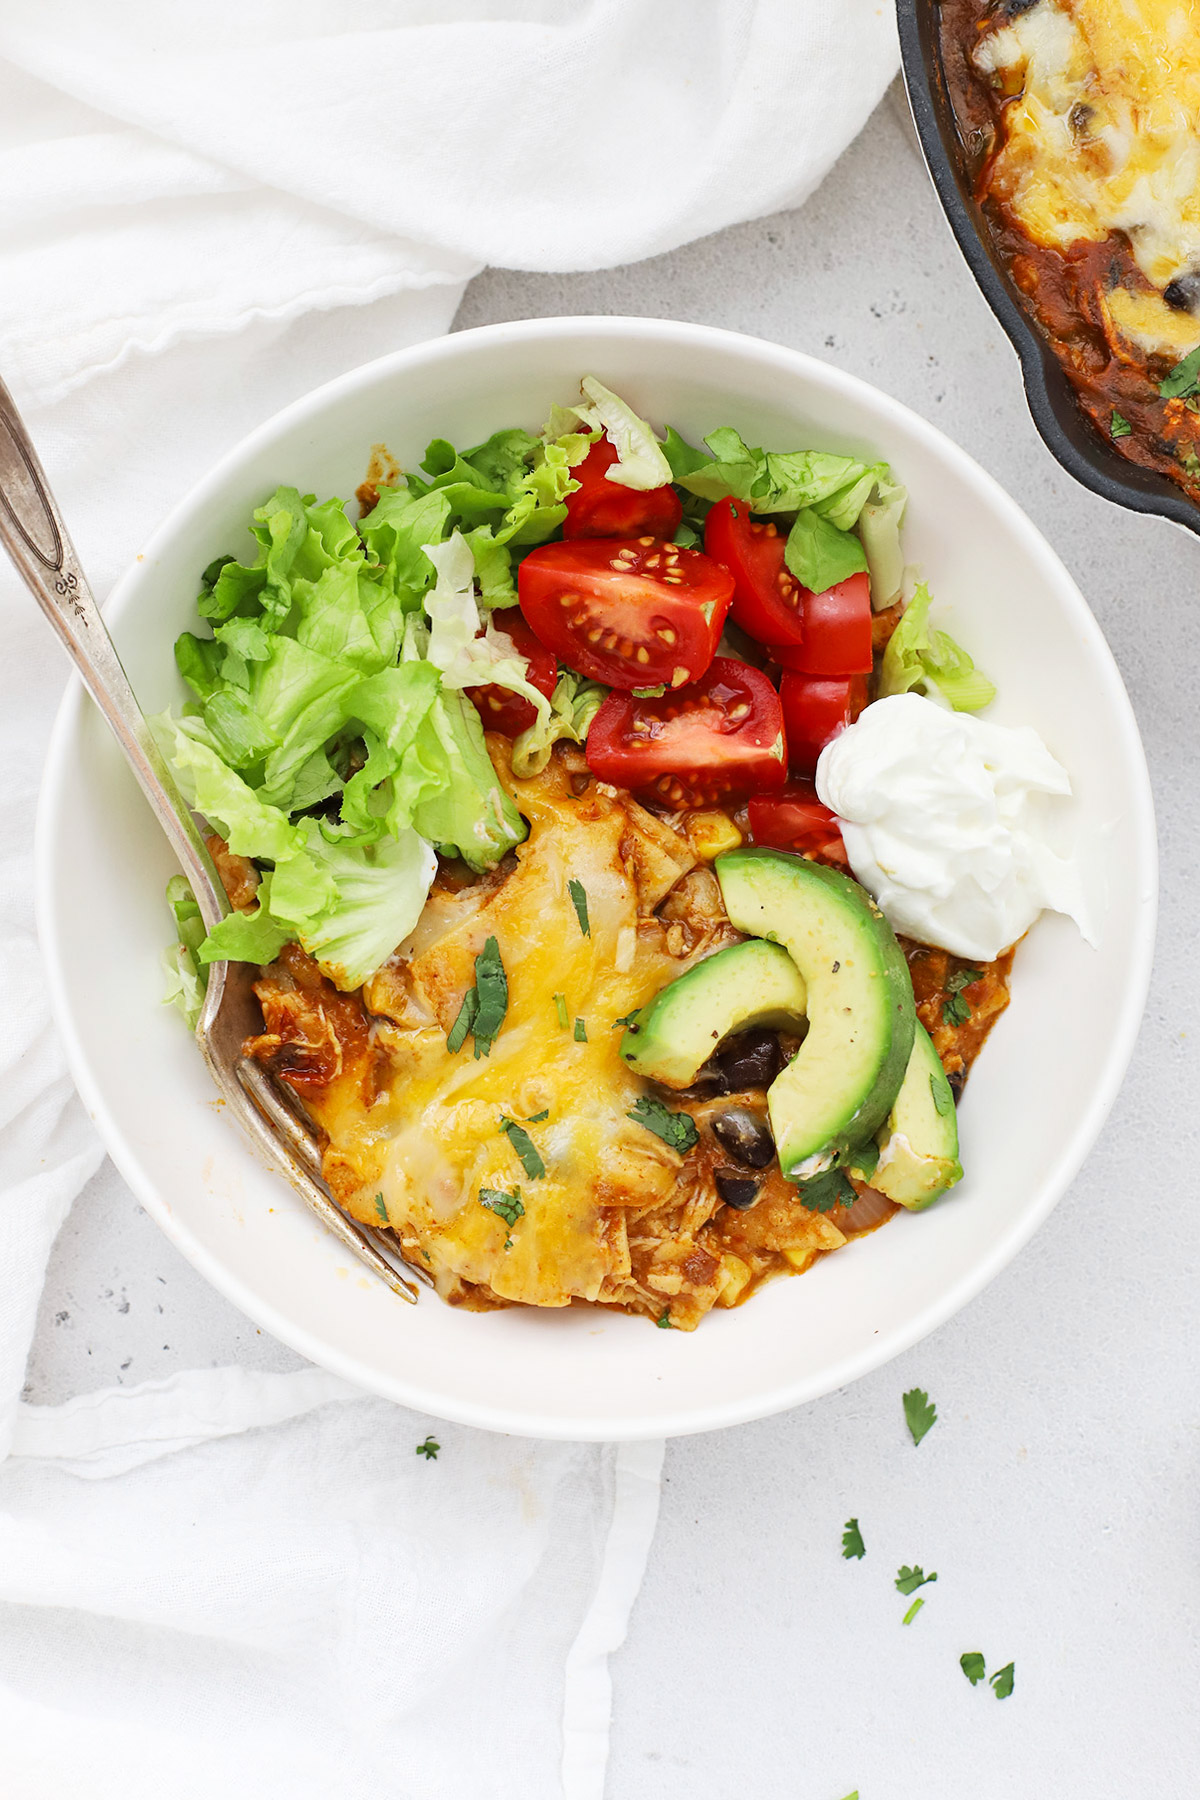 A bowl with a serving of chicken enchilada skillet, served with toppings like avocado, cilantro, lettuce, and tomato